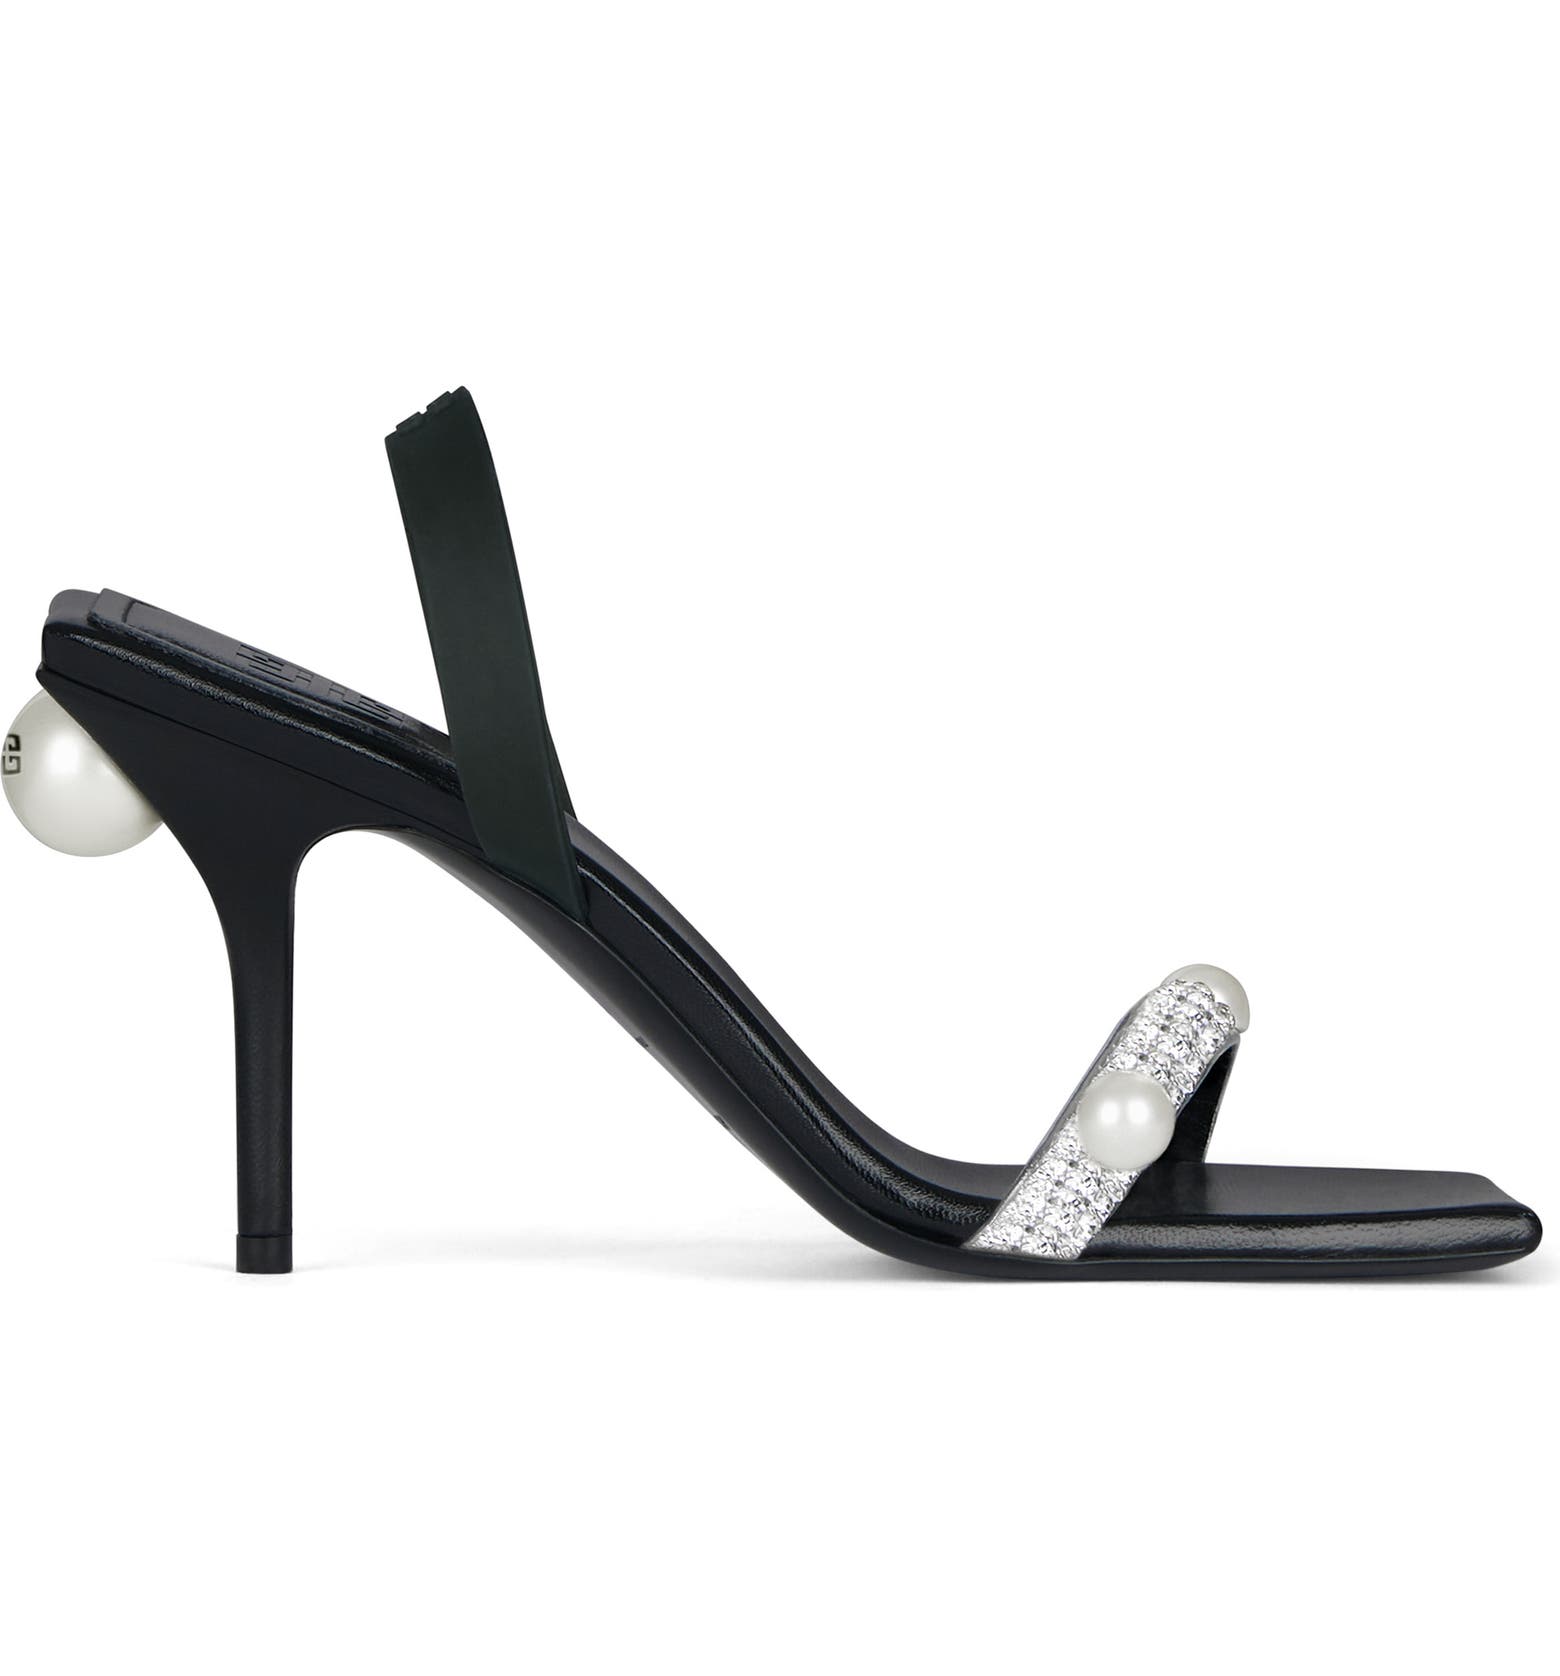 Black heeled sandals with pearls and crystals